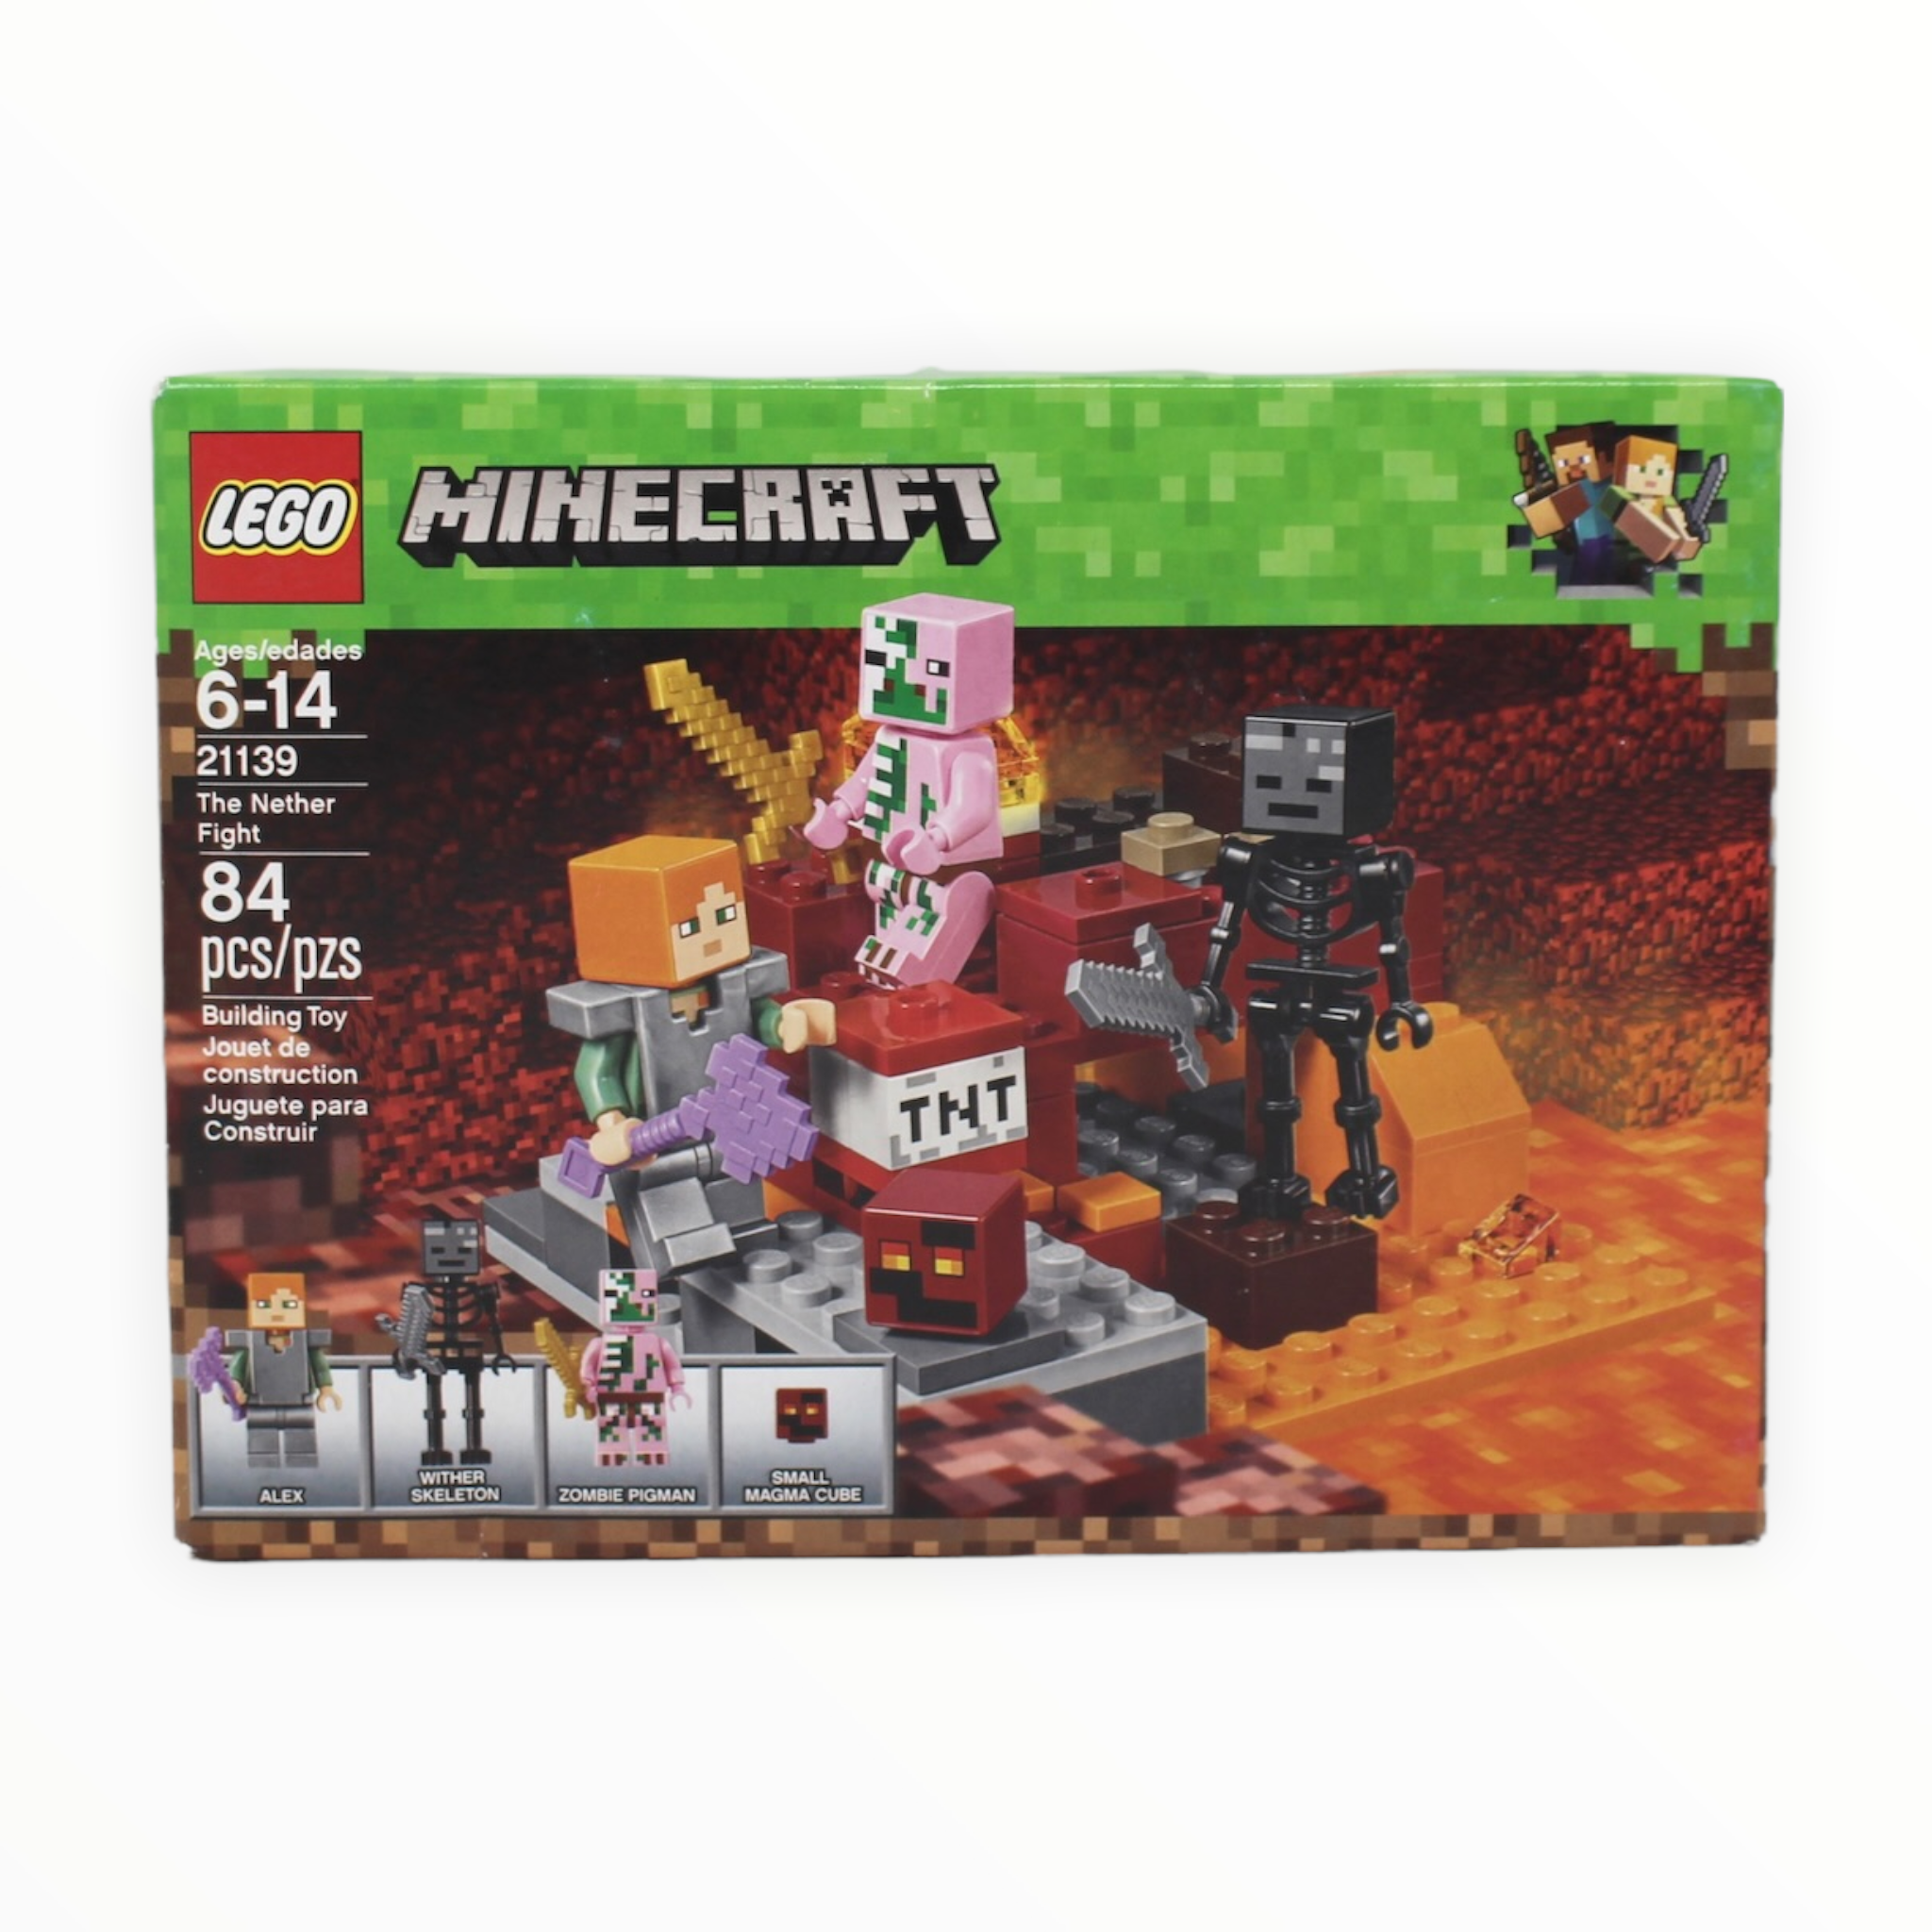 Certified Used Set 21139 Minecraft The Nether Fight